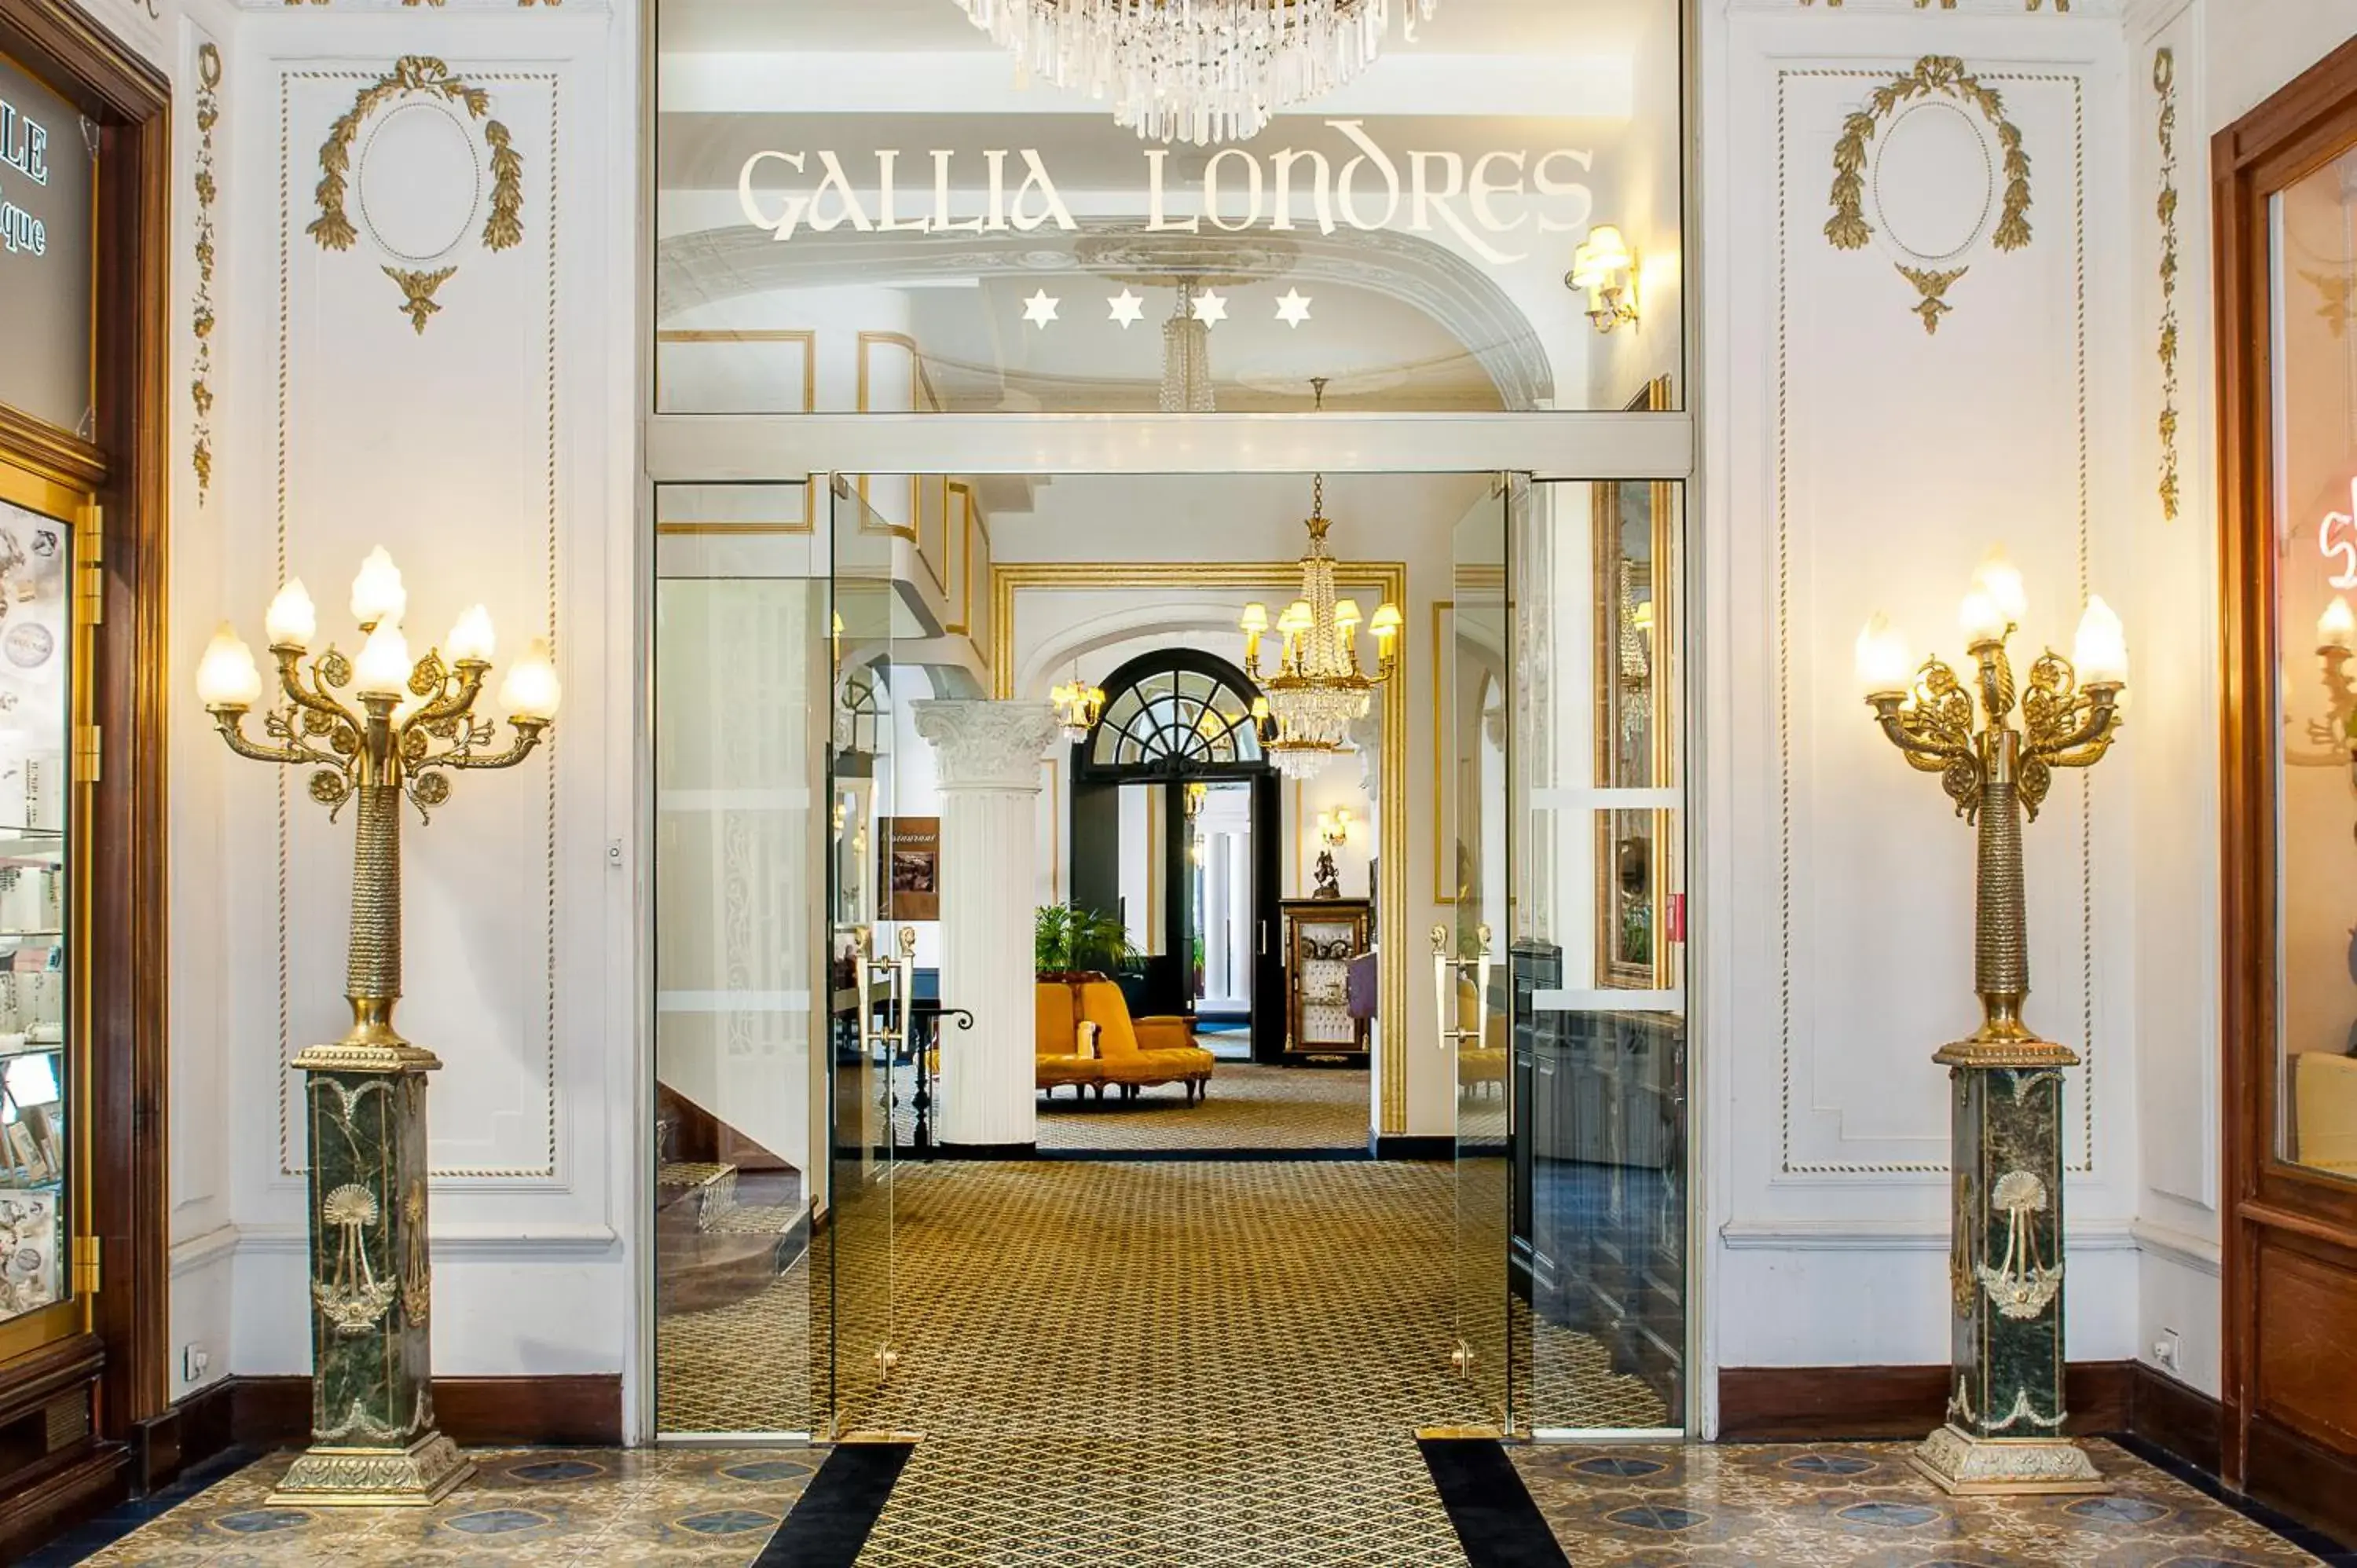 Lobby or reception in Grand Hotel Gallia & Londres